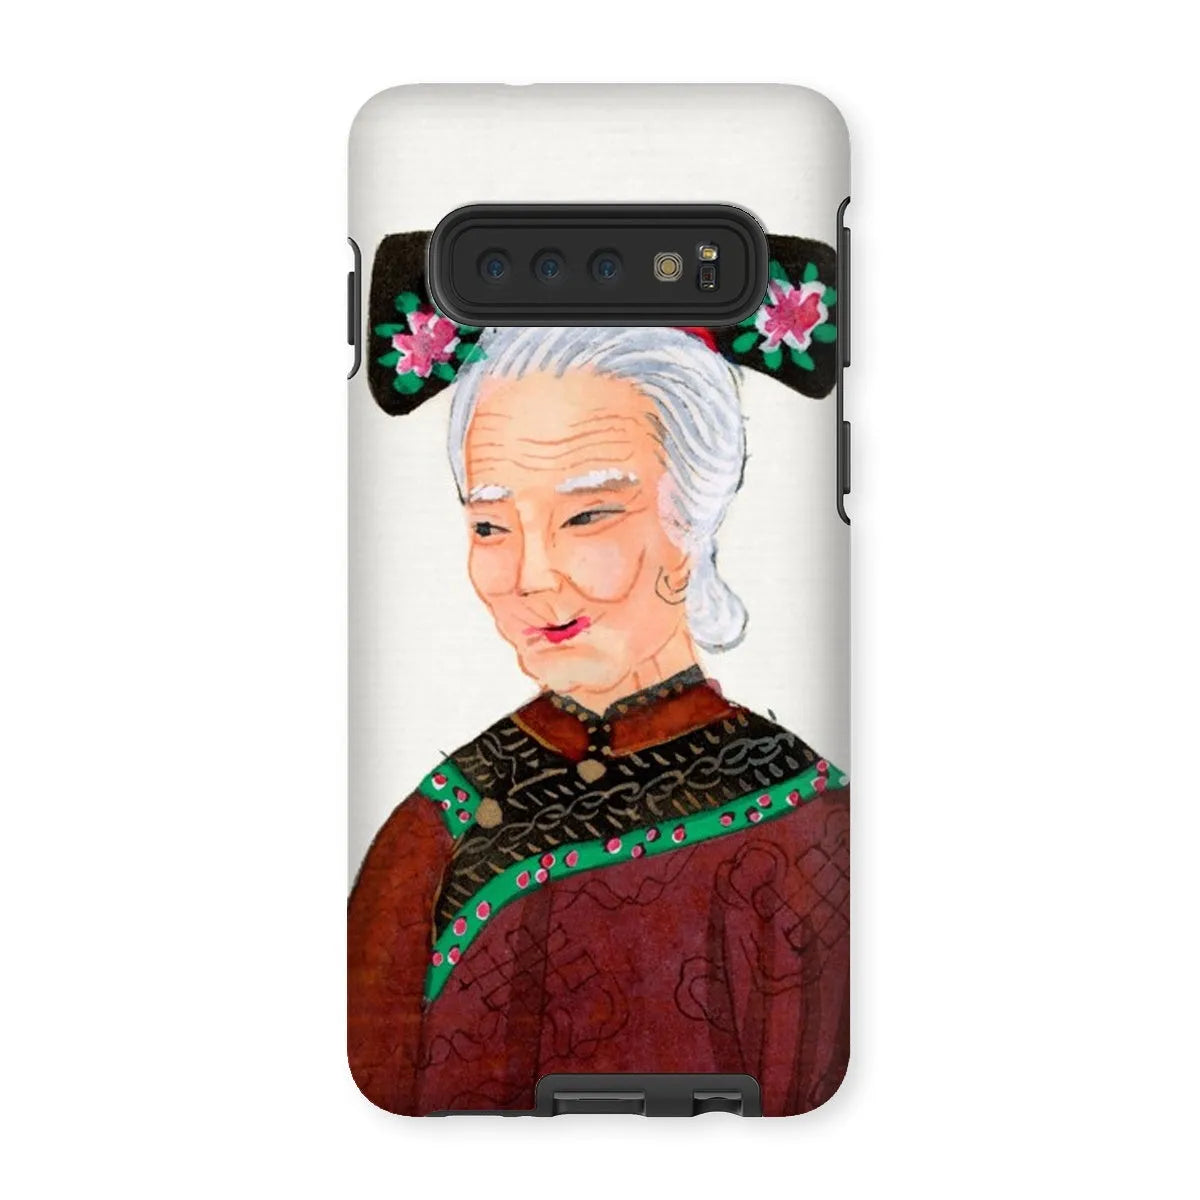 Grand Dame Too - Aesthetic Chinese Art Phone Case - Samsung Galaxy S10 / Matte - Mobile Phone Cases - Aesthetic Art